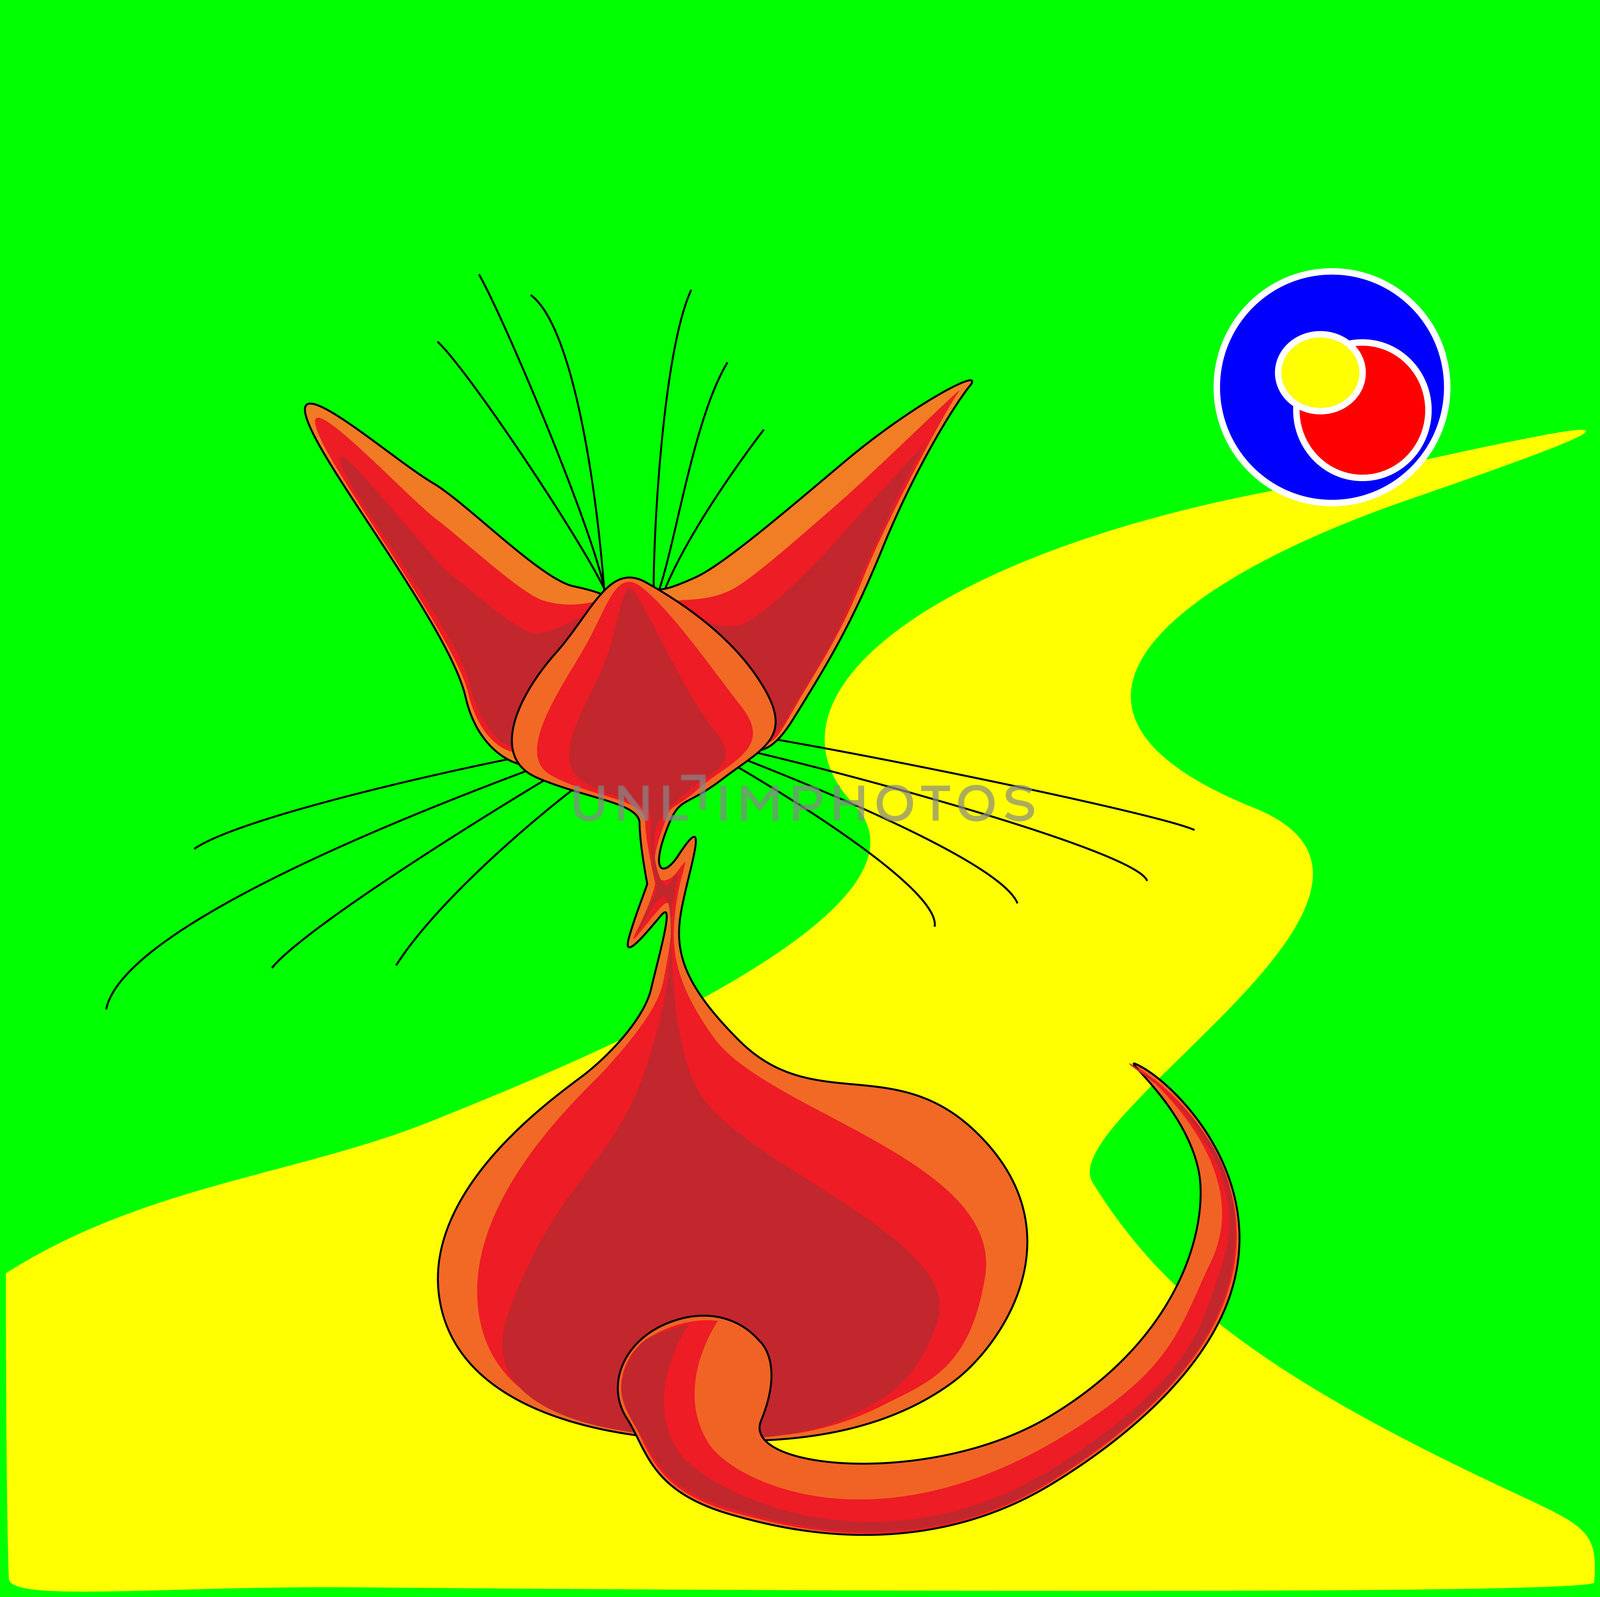 cat sitting, sphinx purebred, pet, looks at the ball, watching the ball, the yellow trail, the road runs, a cat red, green grass, the ball color, long whiskers and tail, big ears